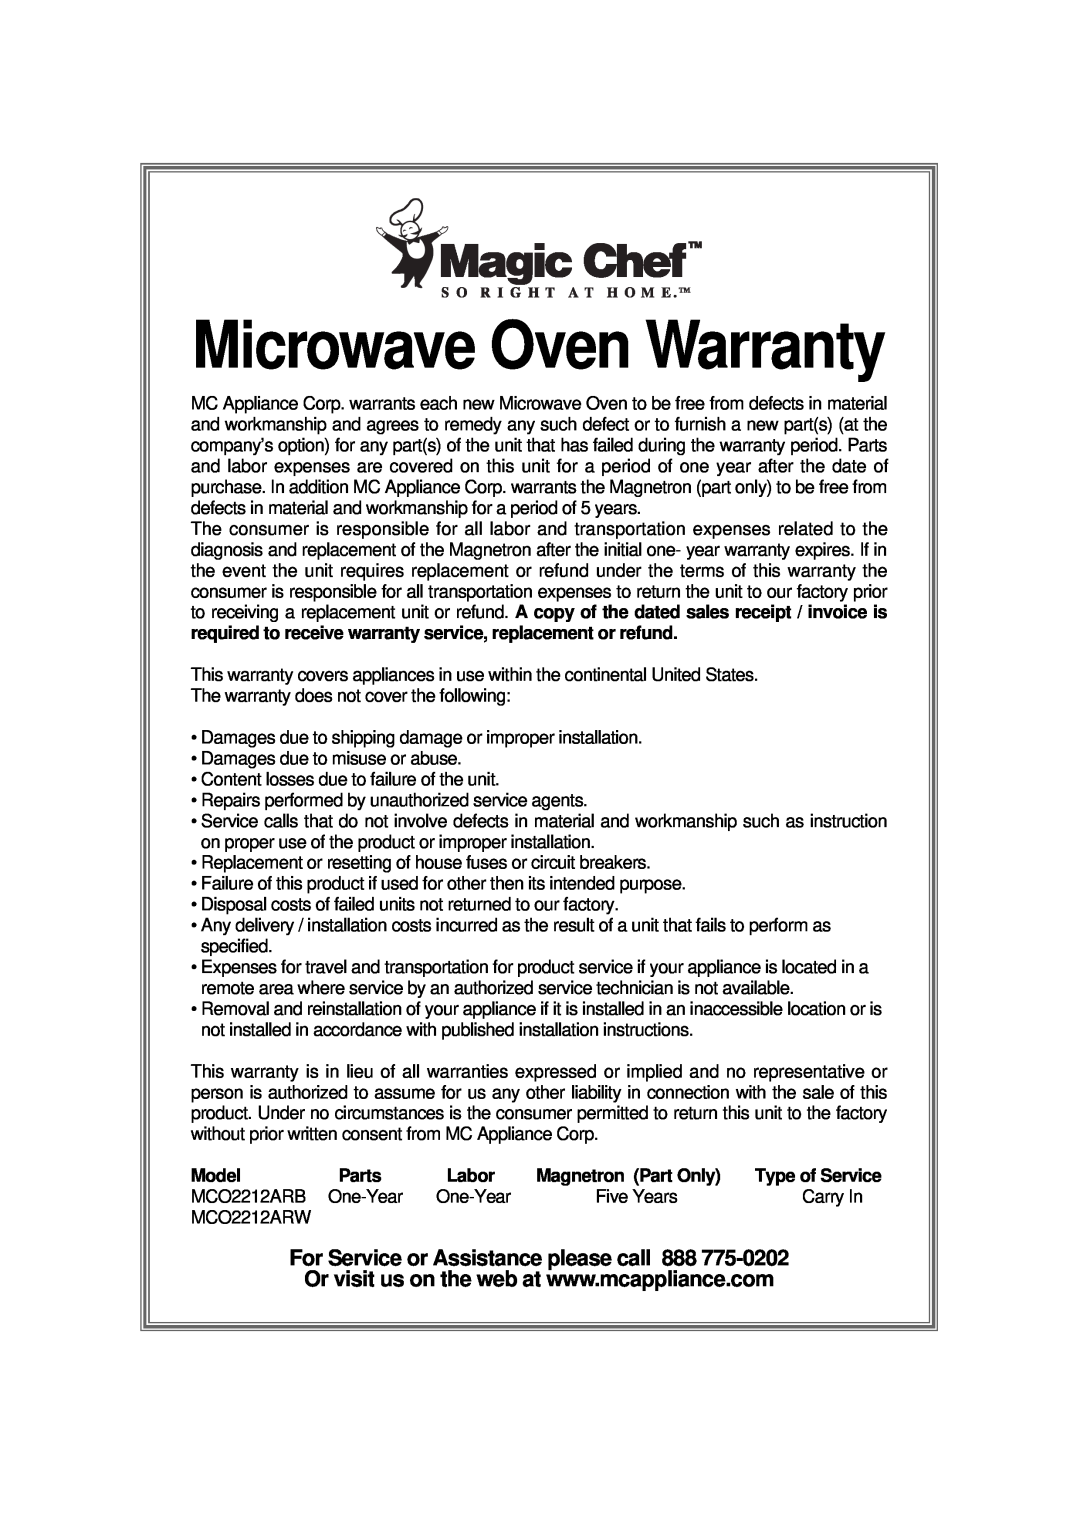 Magic Chef MCO2212ARW manual Microwave Oven Warranty, Model, Parts, Magnetron Part Only 